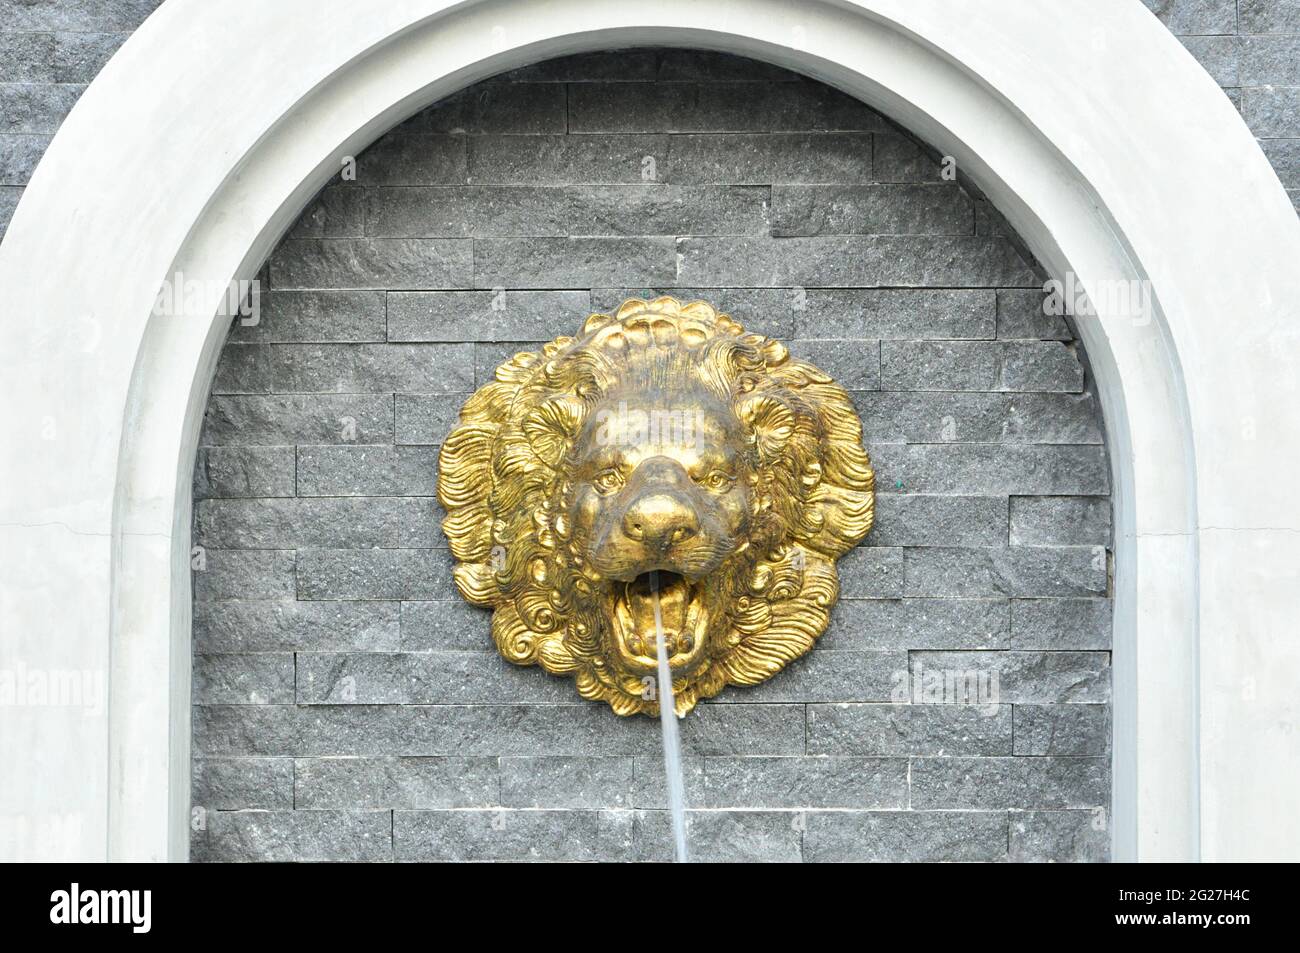 Golden lion head sculpture on stone wall spouting water Stock Photo